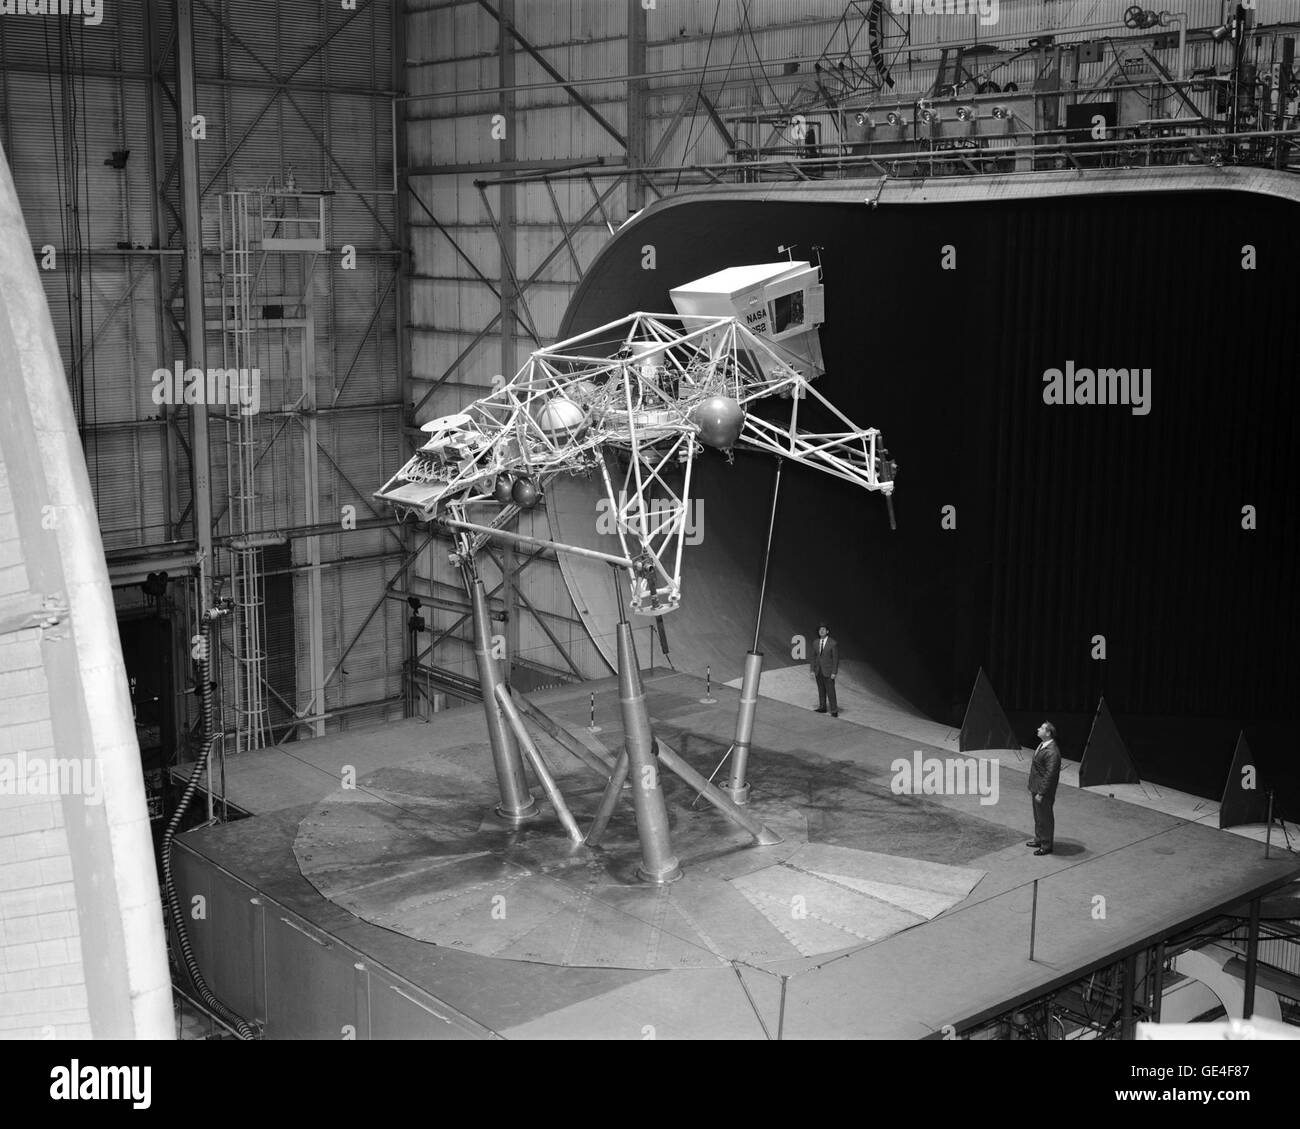 Following the crash of a sister Lunar Landing Training Vehicle at Ellington Field in Houston, Texas, the Bell LLTV (NASA 952) was sent from Houston to Langley for tests in the 30 x 60 Full Scale Tunnel. The LLTV was returned to Houston for further training use a short time later. NASA 952 is now on exhibit at the Johnson Space Center in Houston, Texas.  Image # : L-1969-00670 Date: January 16, 1969 Stock Photo